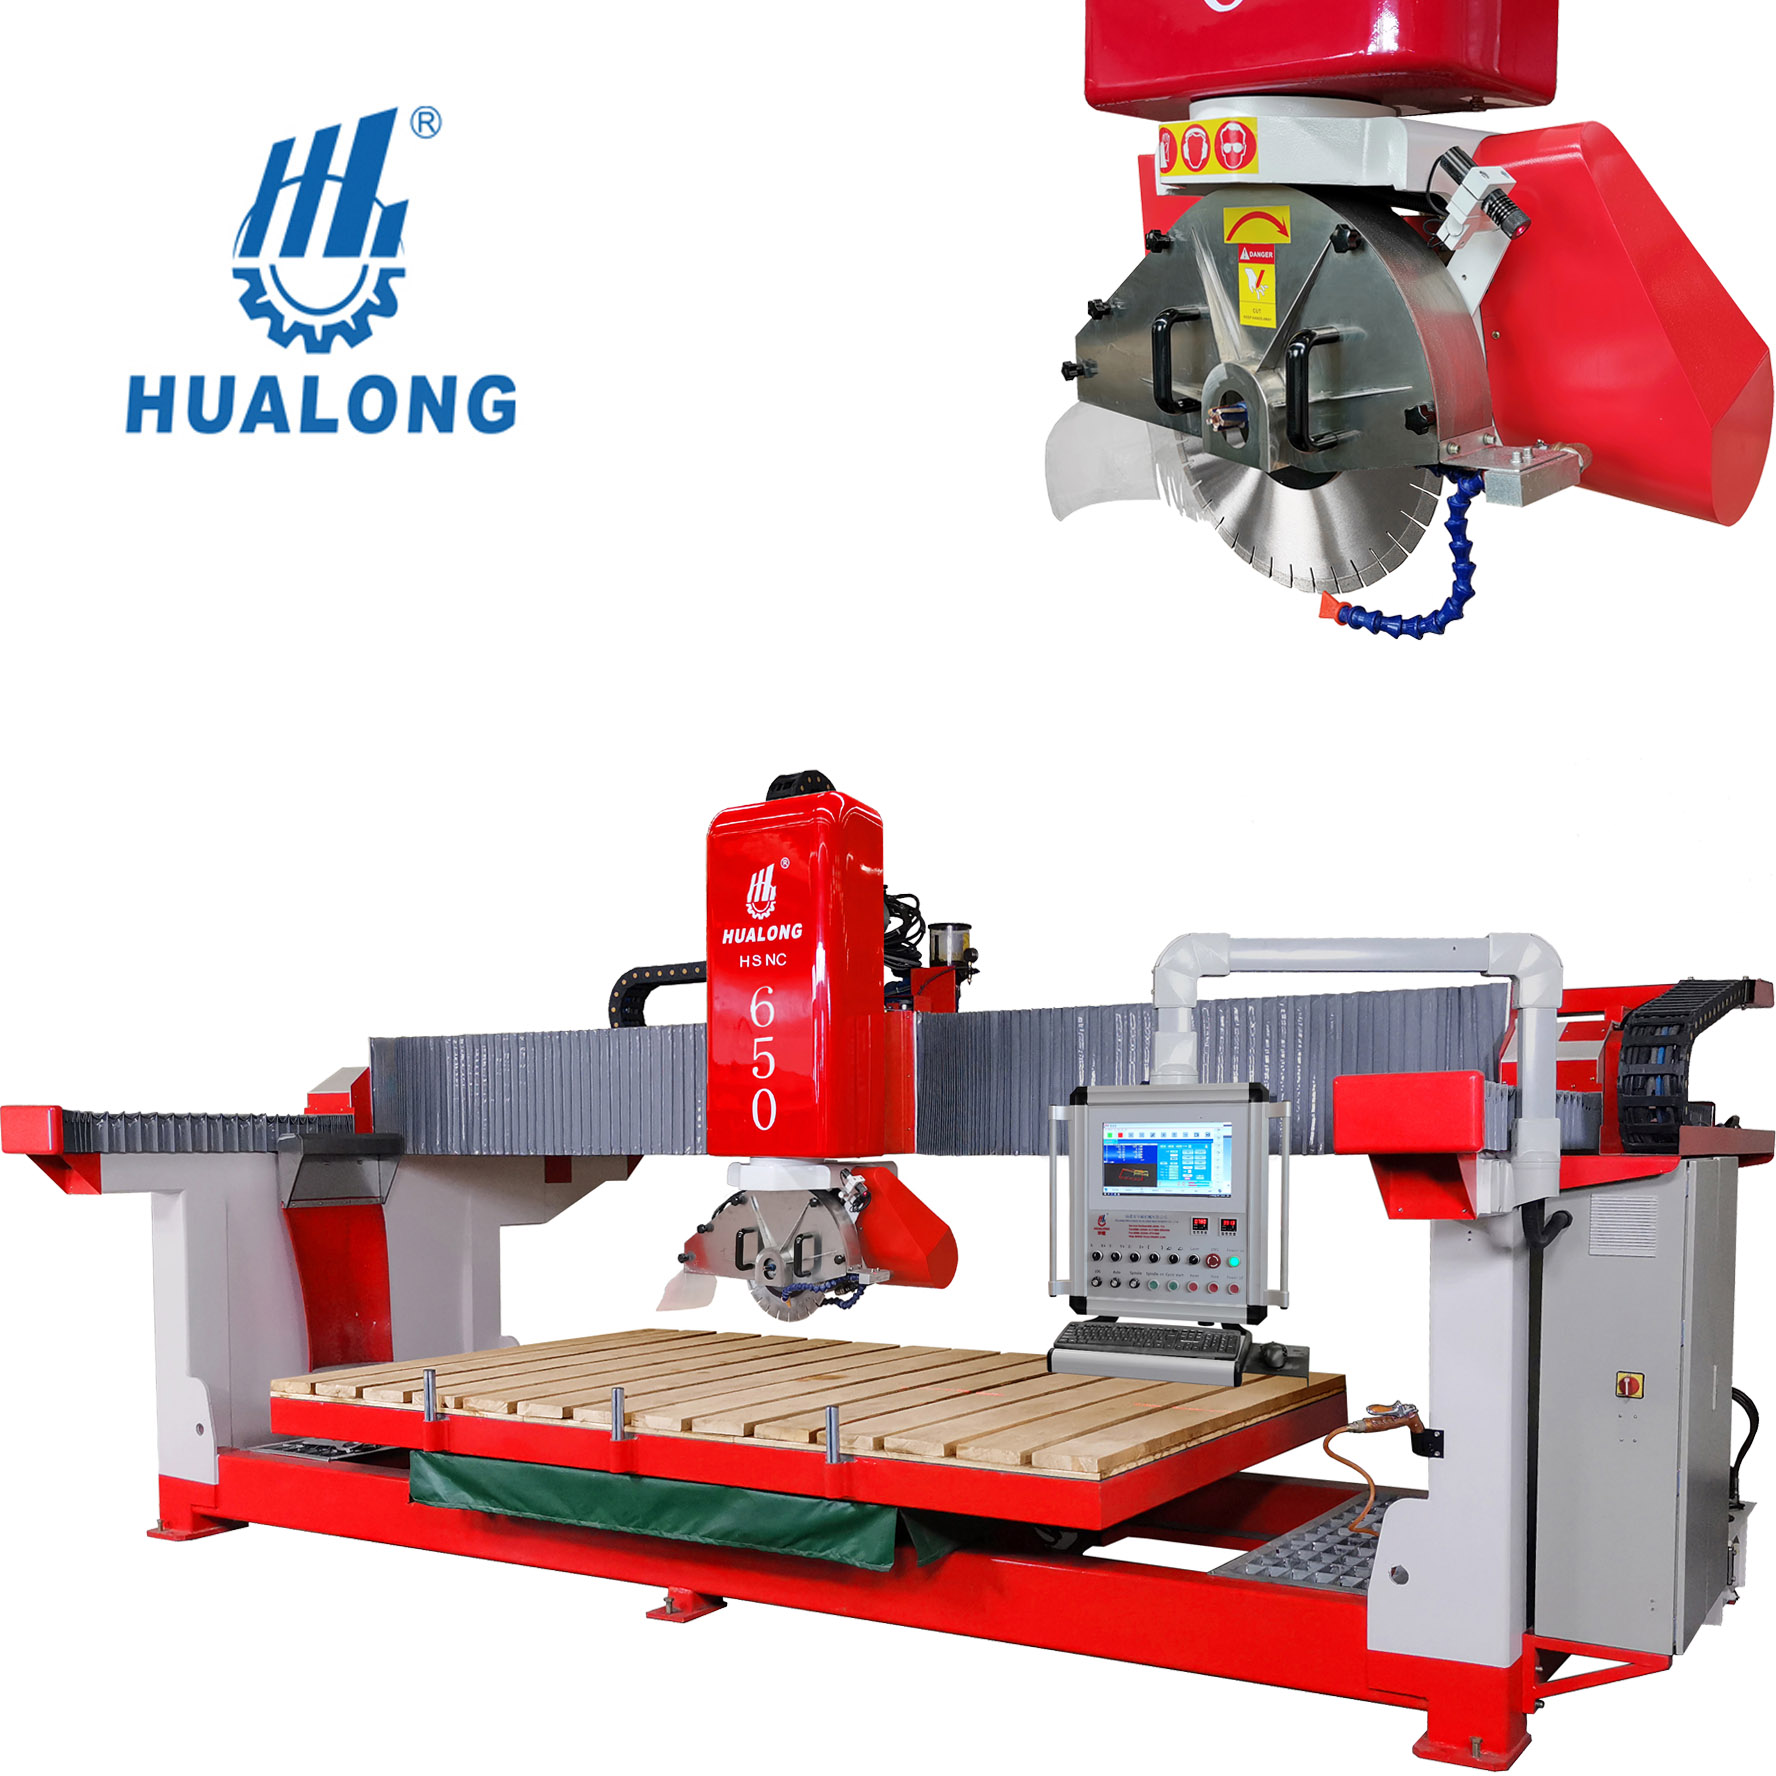 Hualong HSNC-650 3 axis CNC Bridge Stone Cutting Machine suitable for processing countertop with sink.cutting stone slabs to size machine